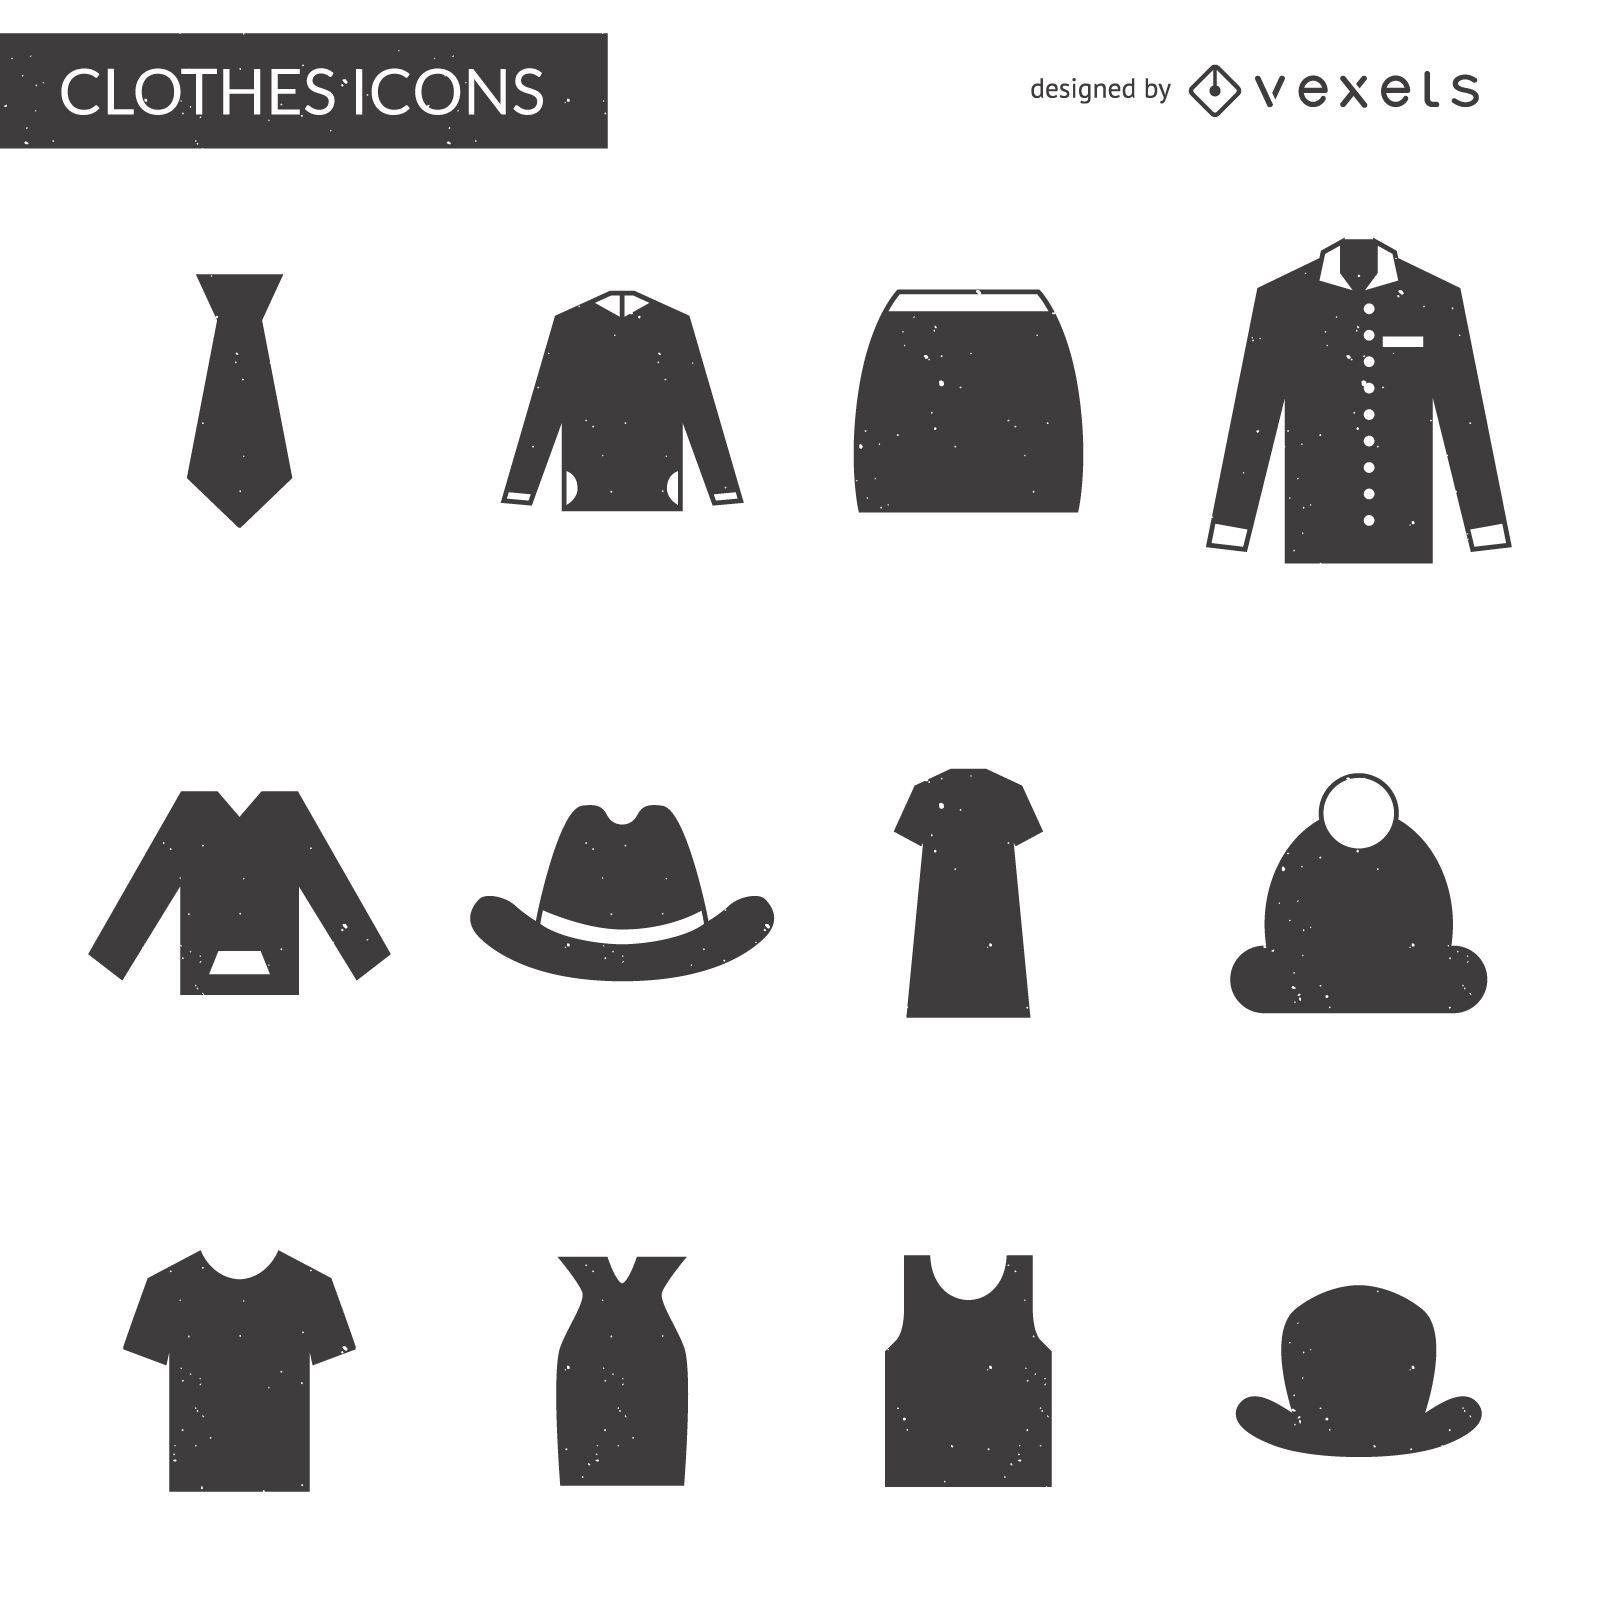 Clothing elements icon collection